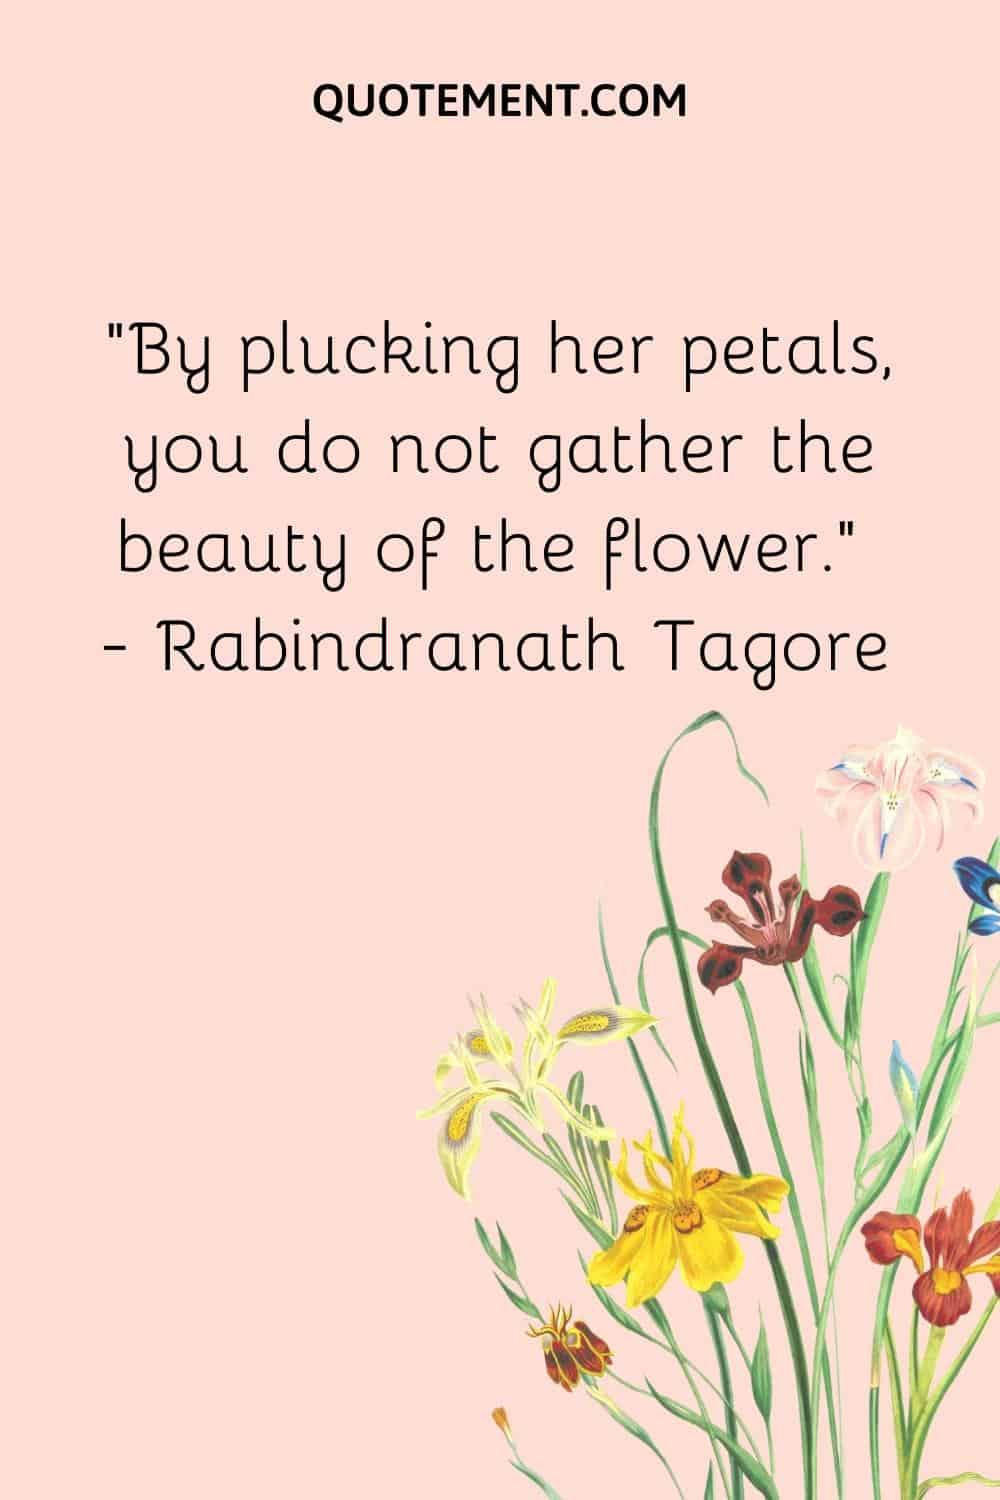 “By plucking her petals, you do not gather the beauty of the flower.” — Rabindranath Tagore